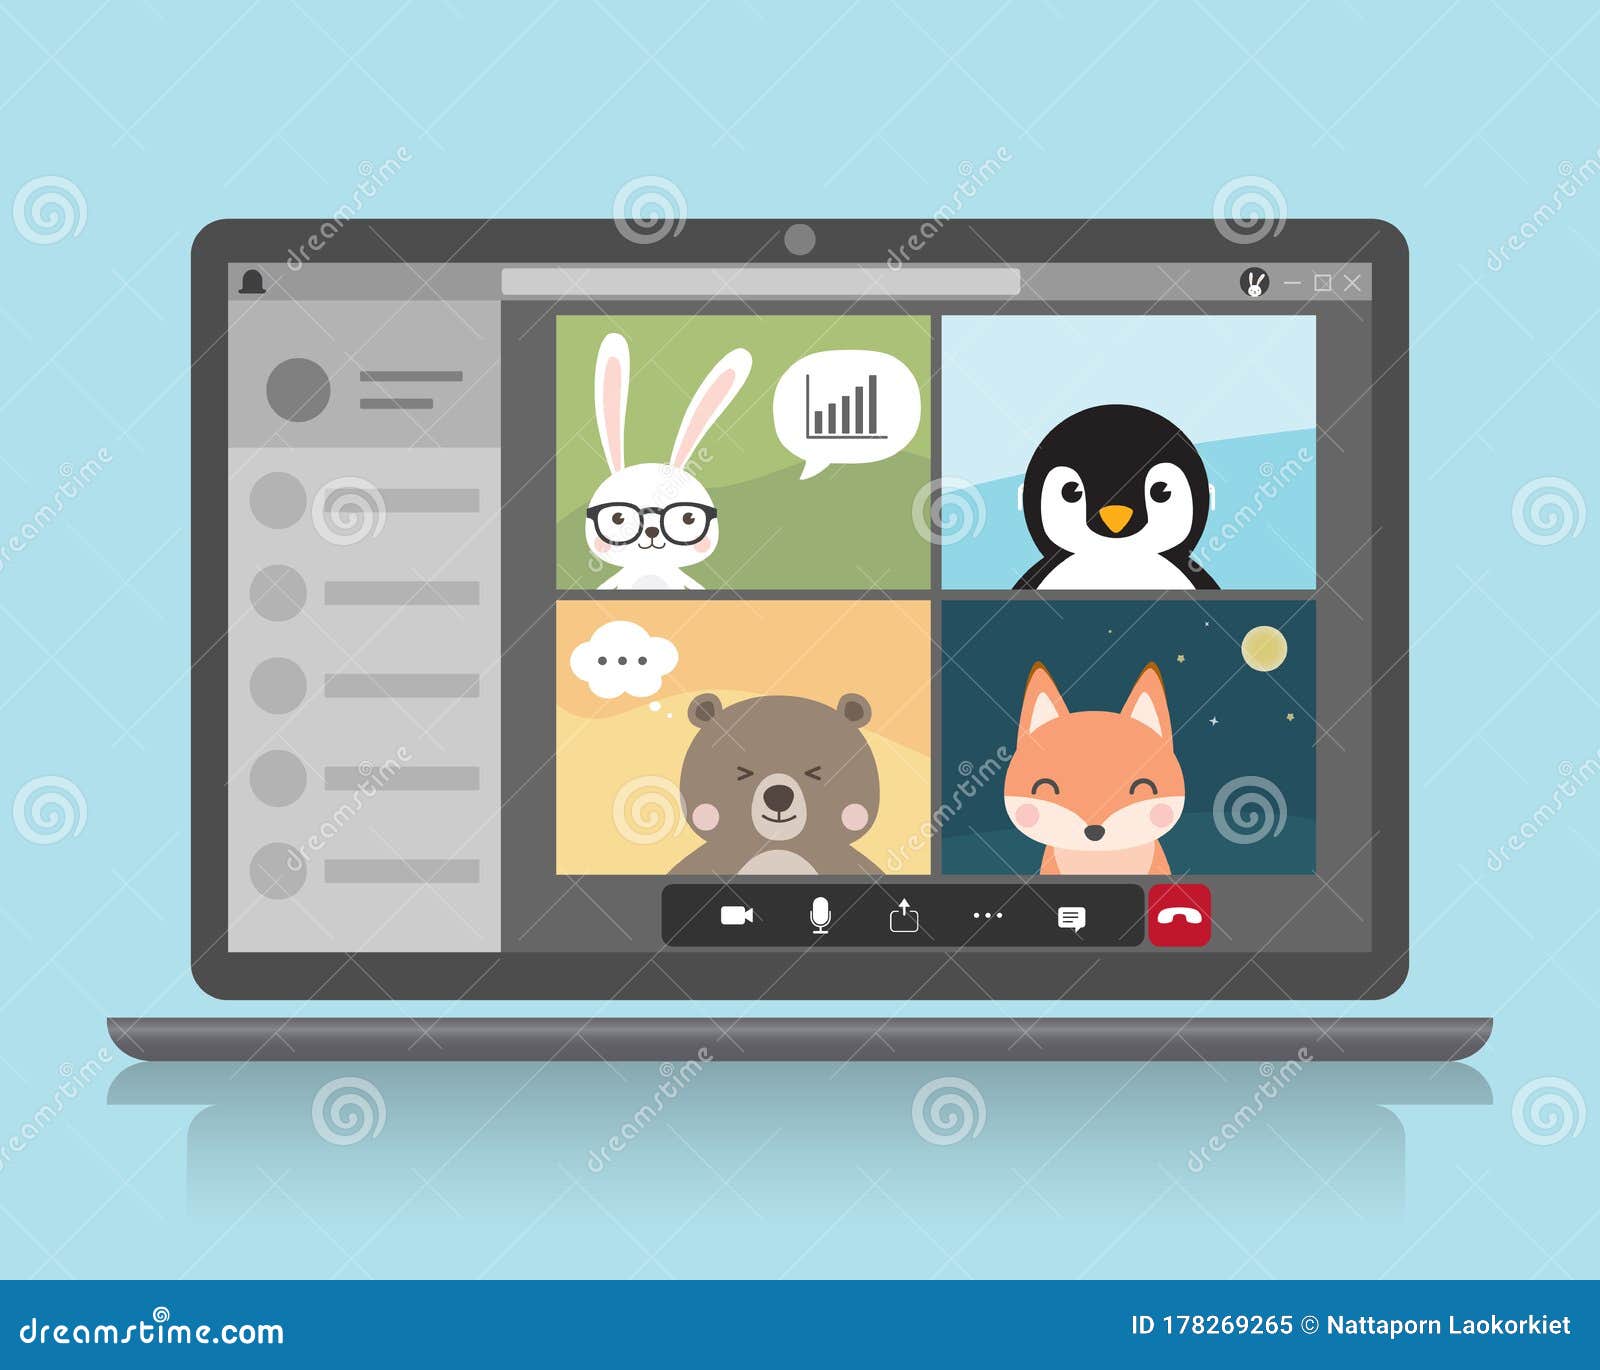 animal charactor video conference call. working from home concept. business working online vdo call conference meeting